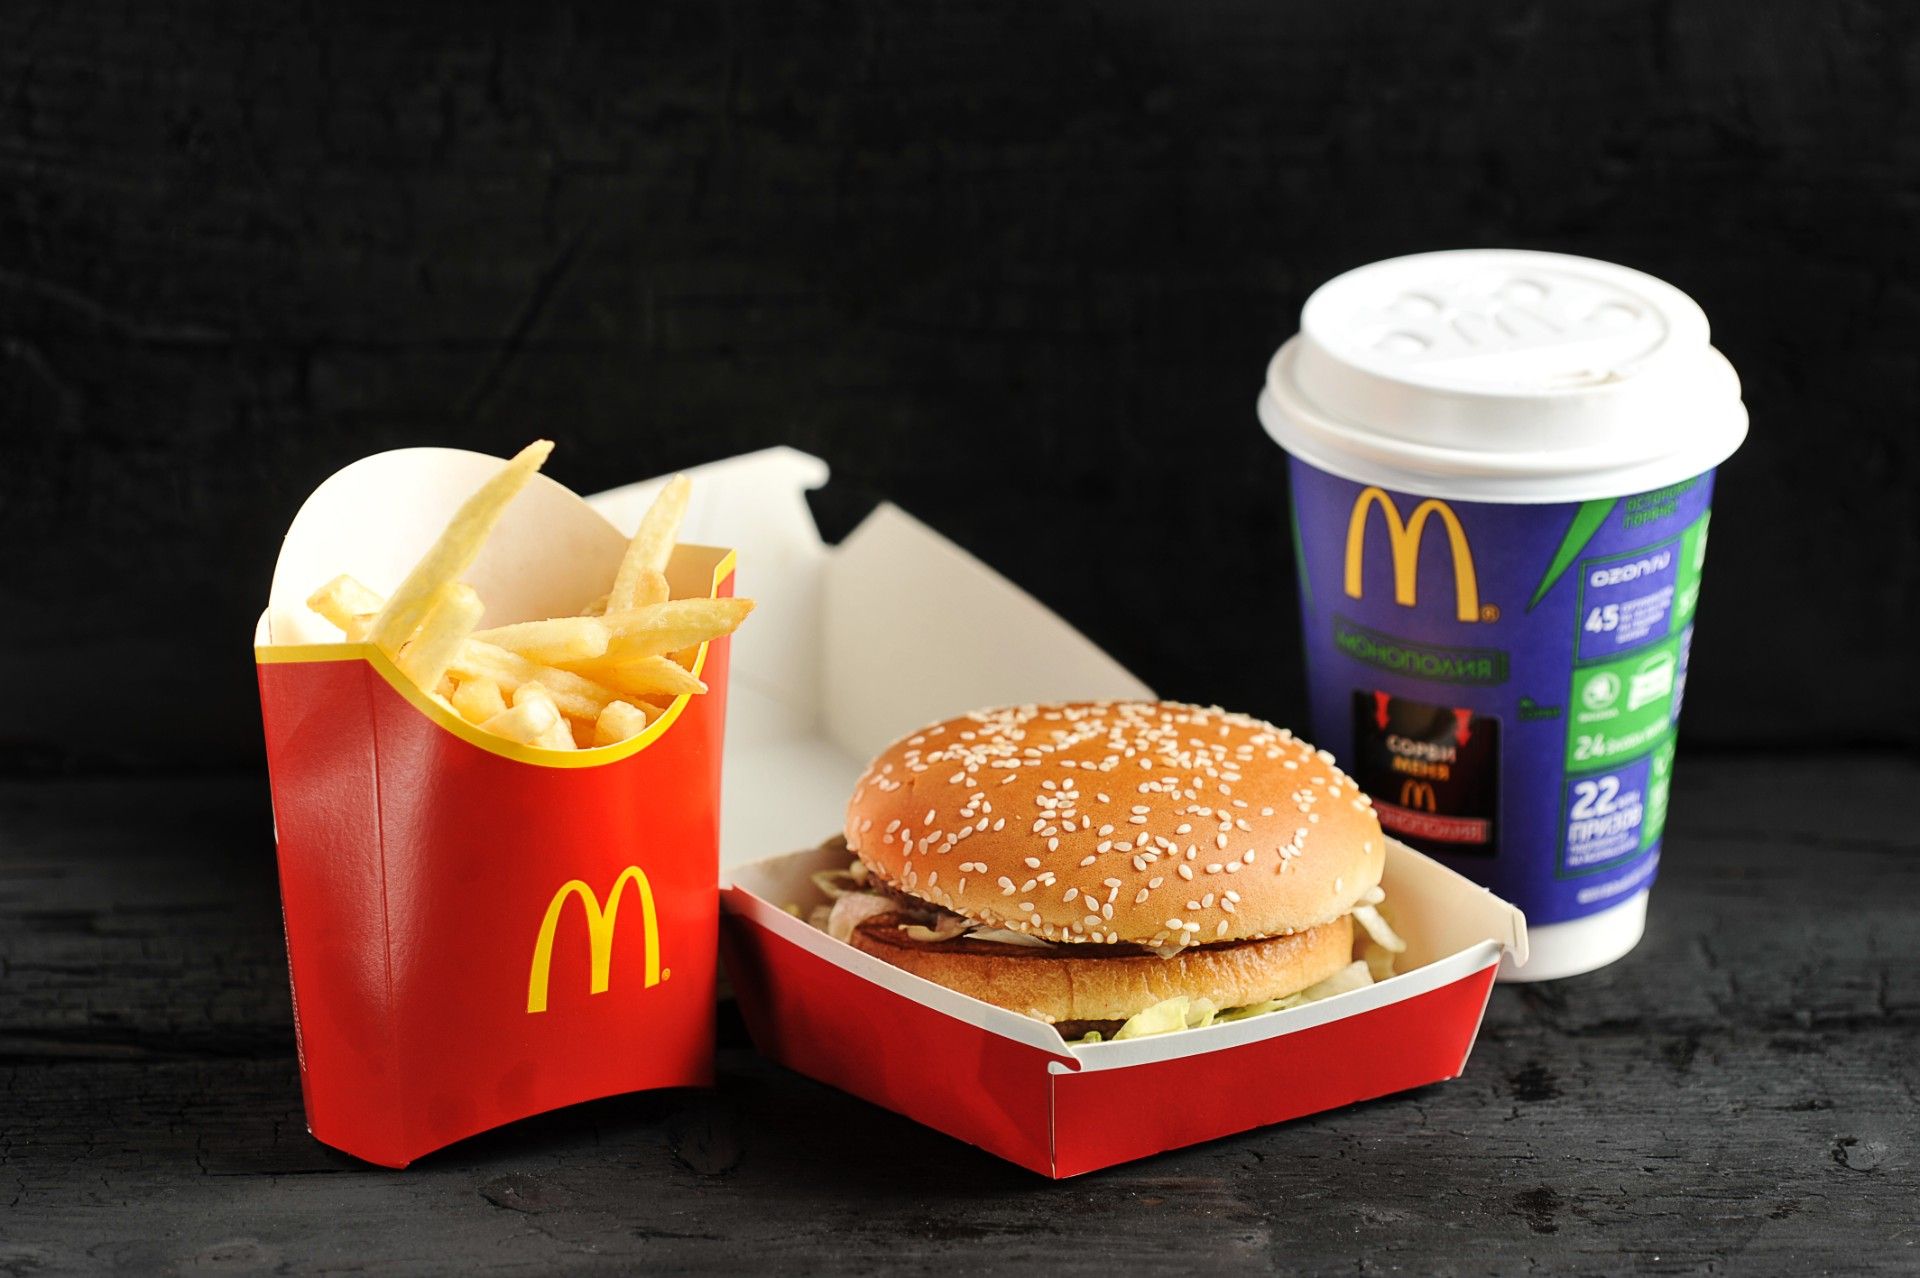 McDonald's french fries, burger, and coffee